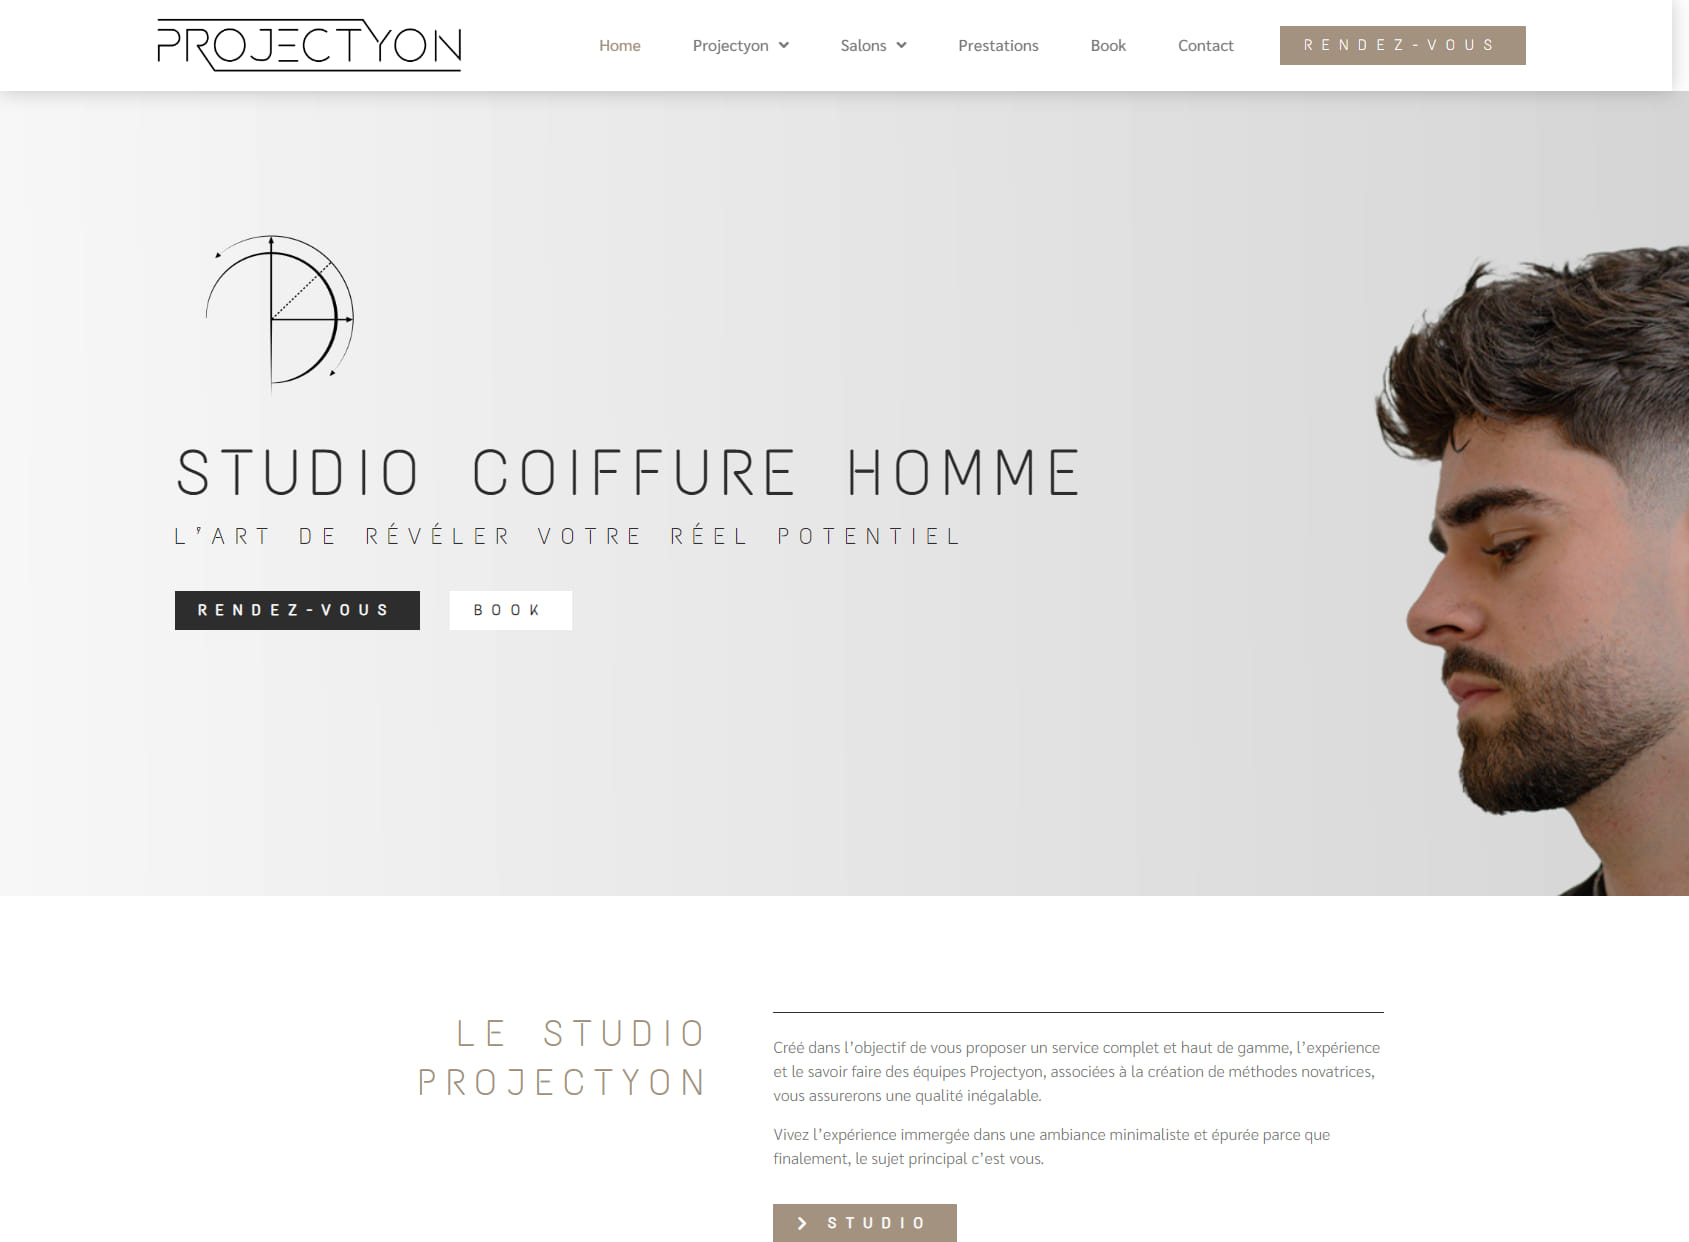 PROJECTYON Poitiers